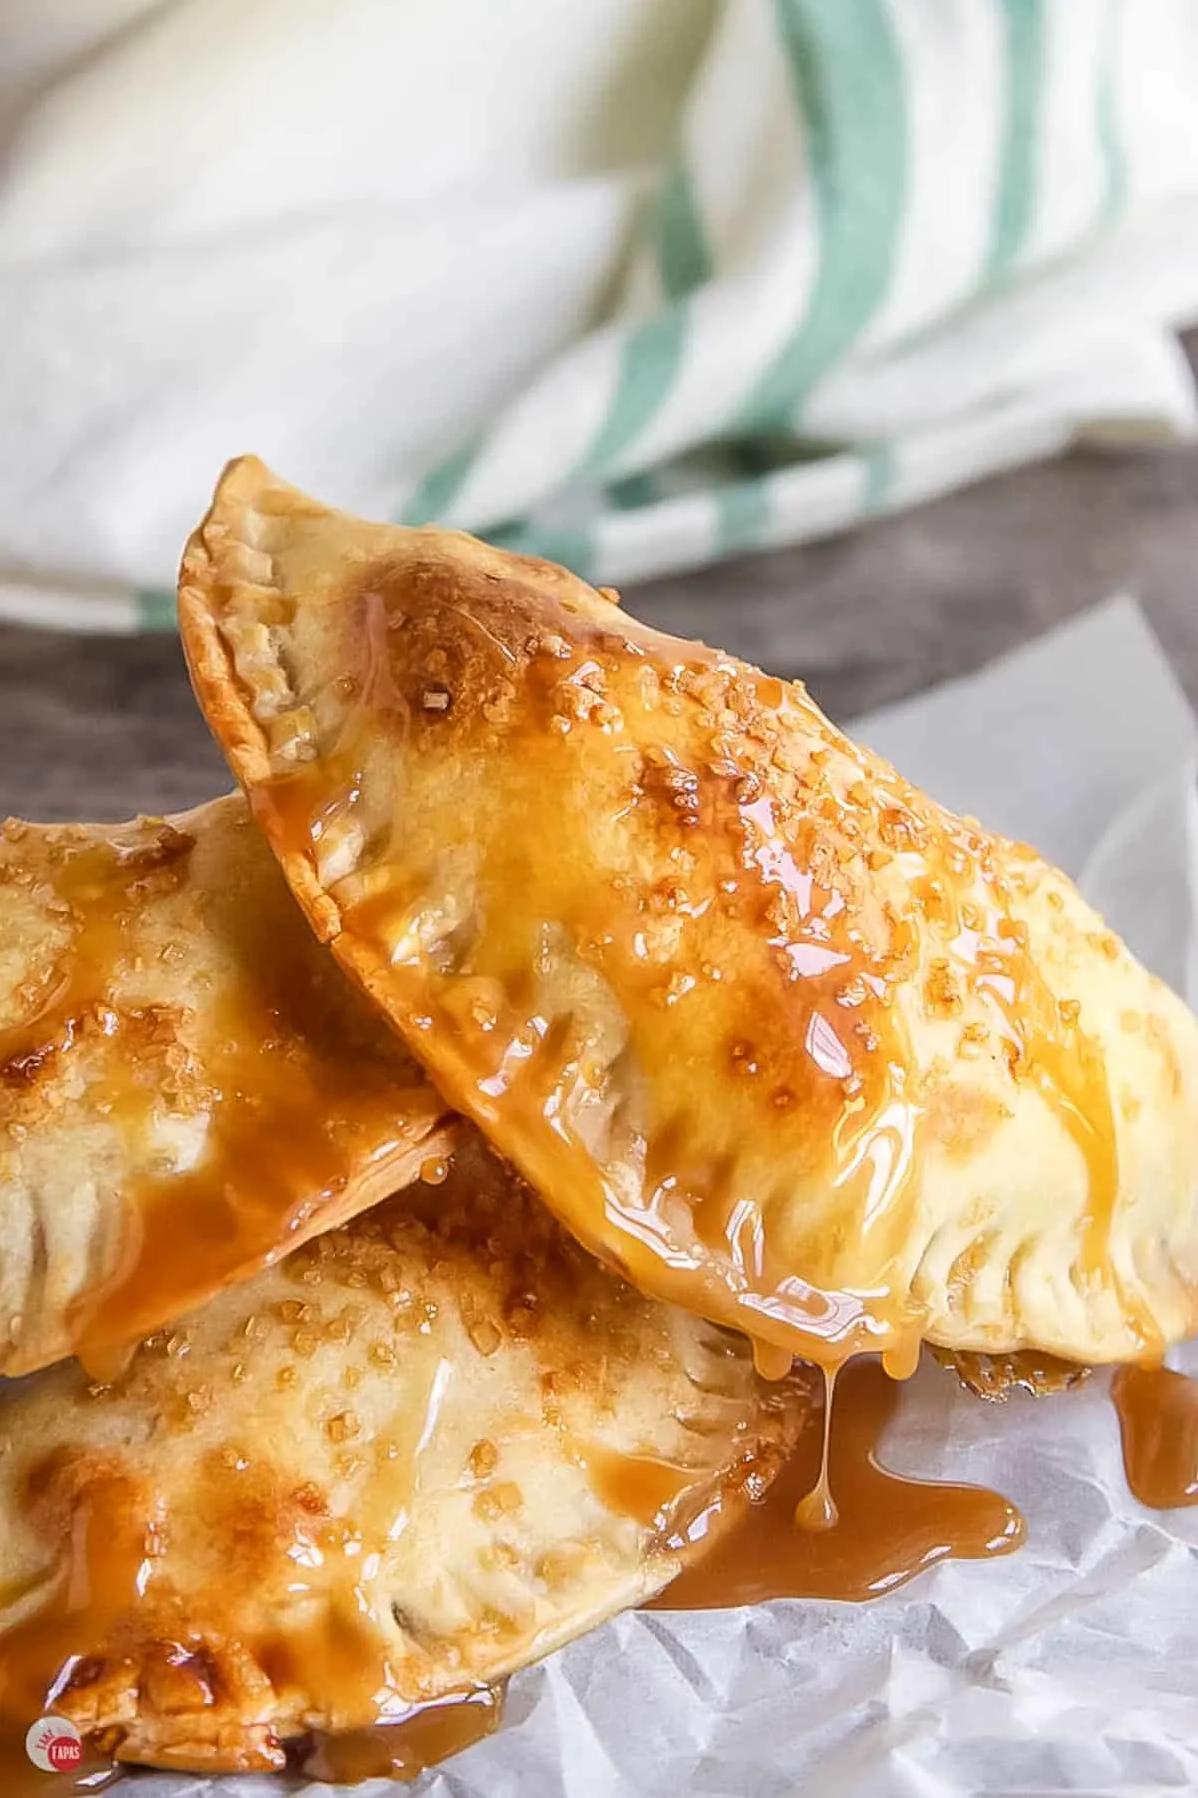  These empanadas are the perfect way to use up your extra apples!